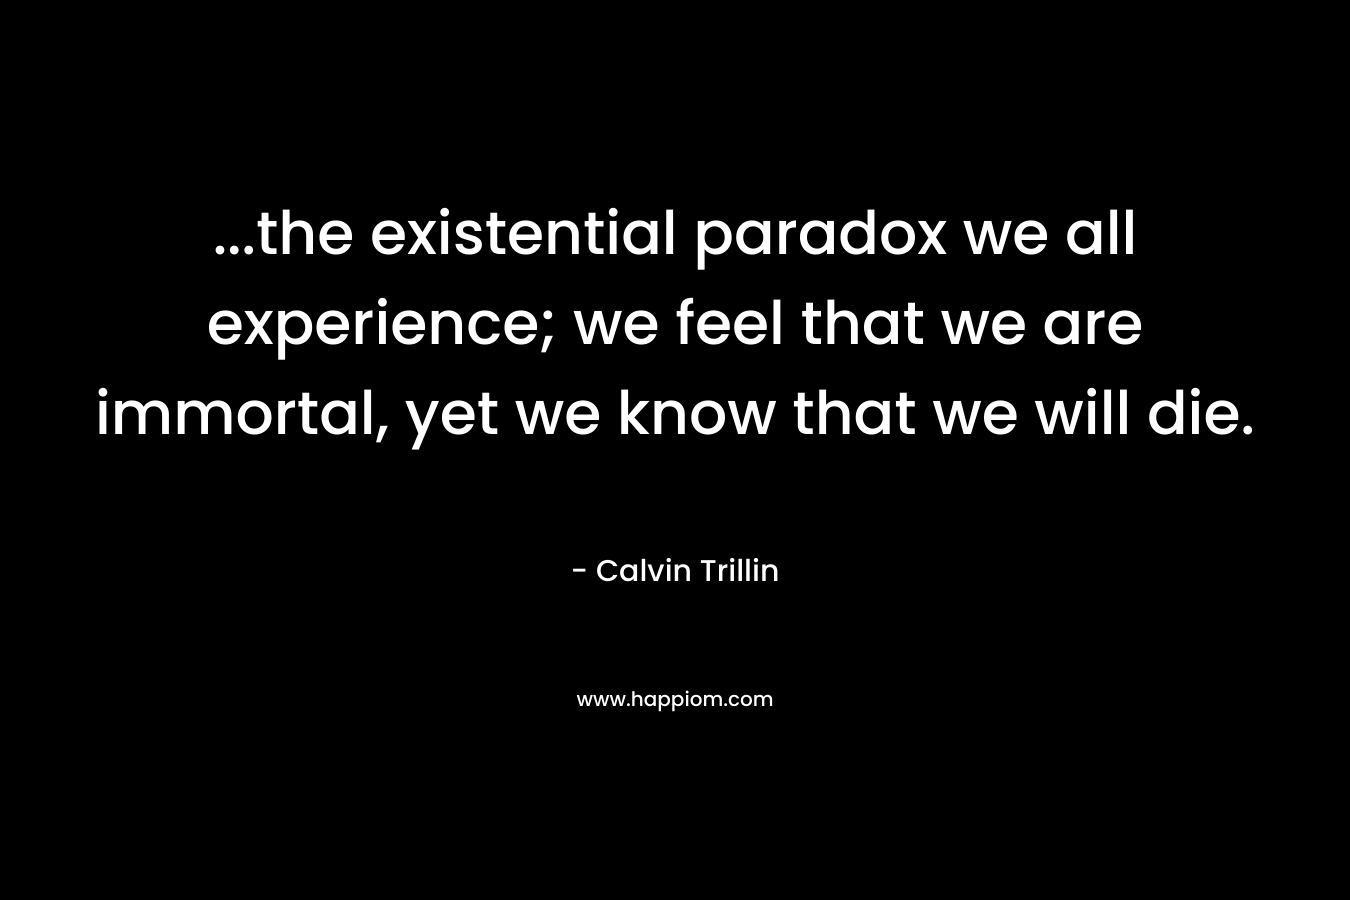 …the existential paradox we all experience; we feel that we are immortal, yet we know that we will die. – Calvin Trillin